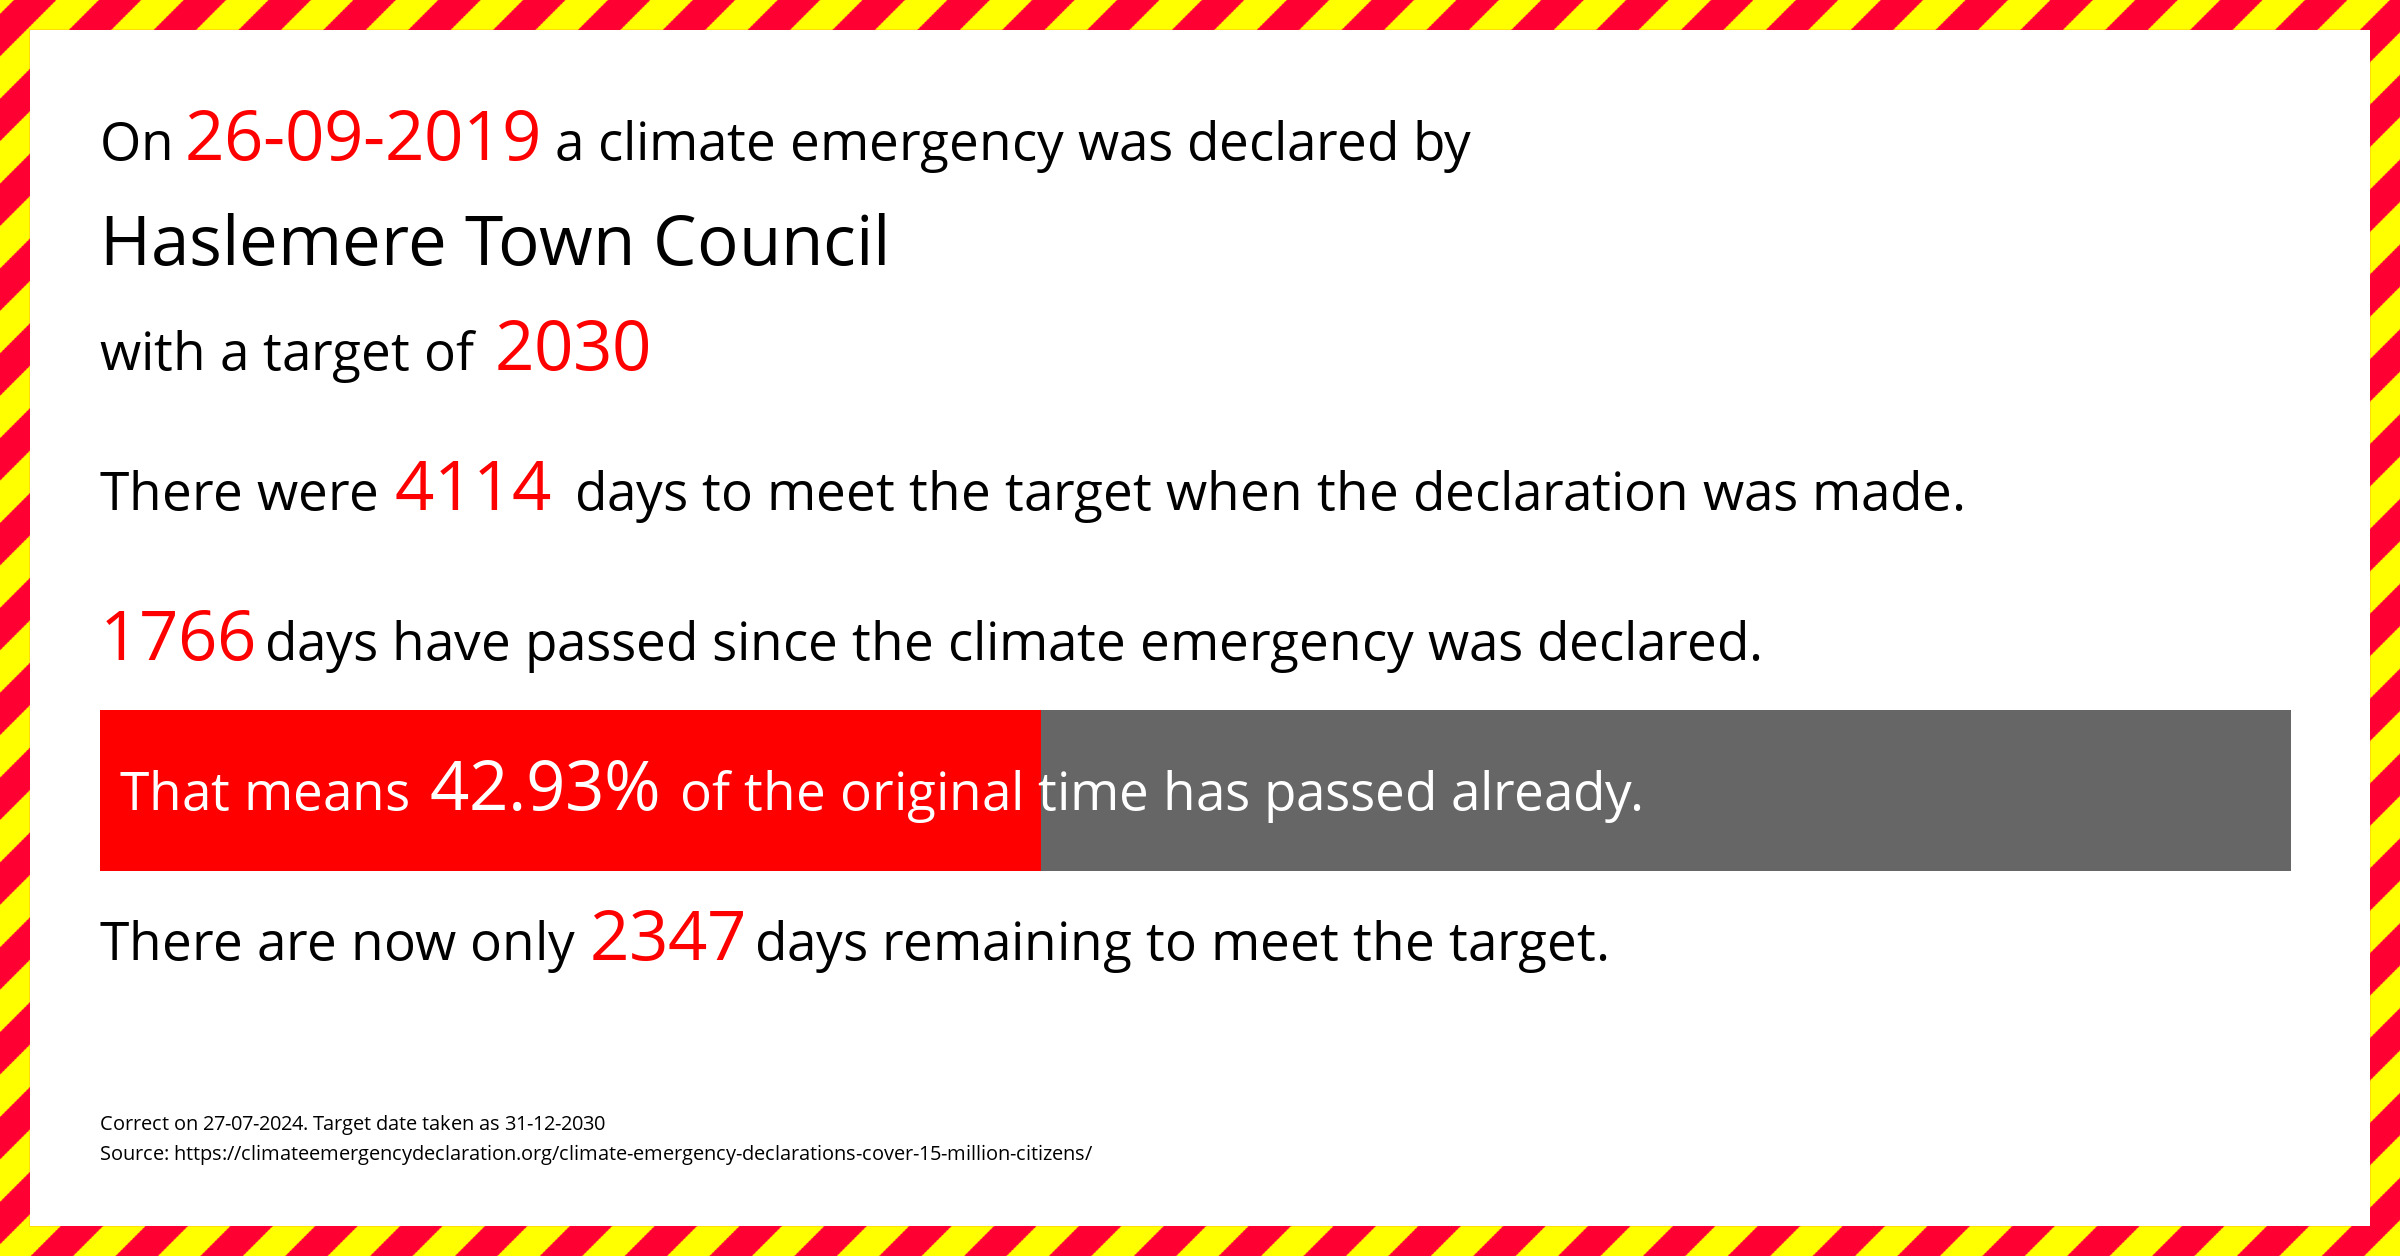 Haslemere Town Council declared a Climate emergency on Thursday 26th September 2019, with a target of 2030.